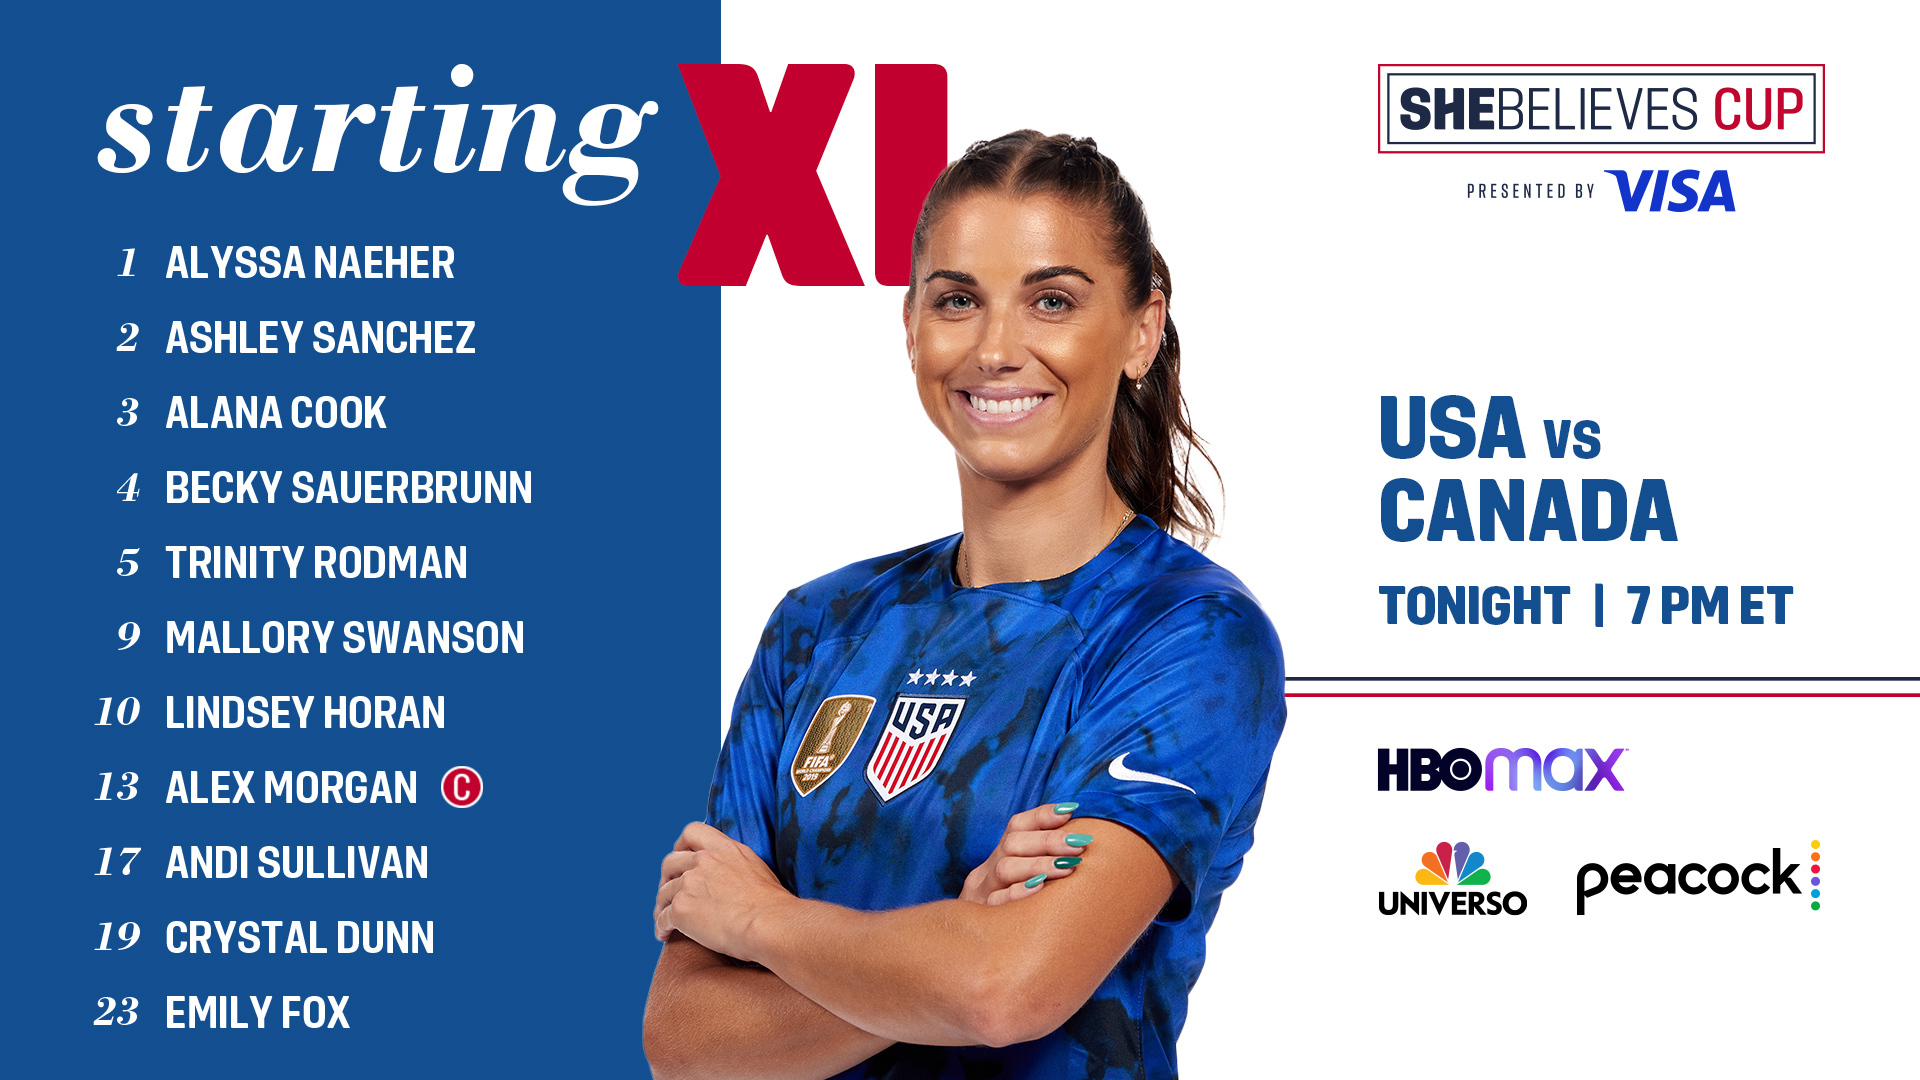 USWNT vs. Canada 2023 SheBelieves Cup, presented by Visa U.S